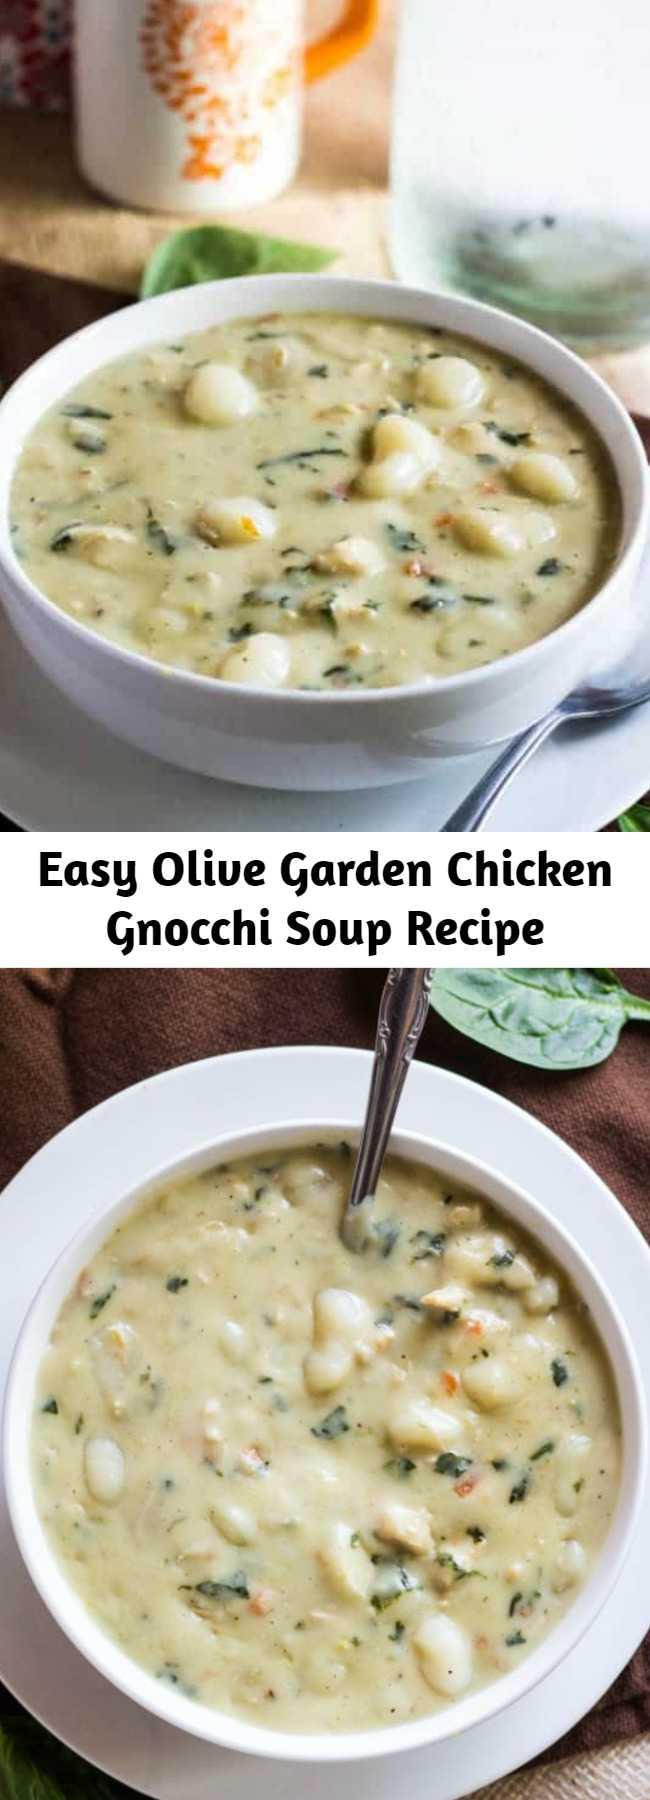 Easy Olive Garden Chicken Gnocchi Soup Recipe - Want a tasty copycat recipe that everyone will love? This Olive Garden Chicken Gnocchi Soup is easy, flavorful and completely addicting. Simple ingredients make this better than the original!